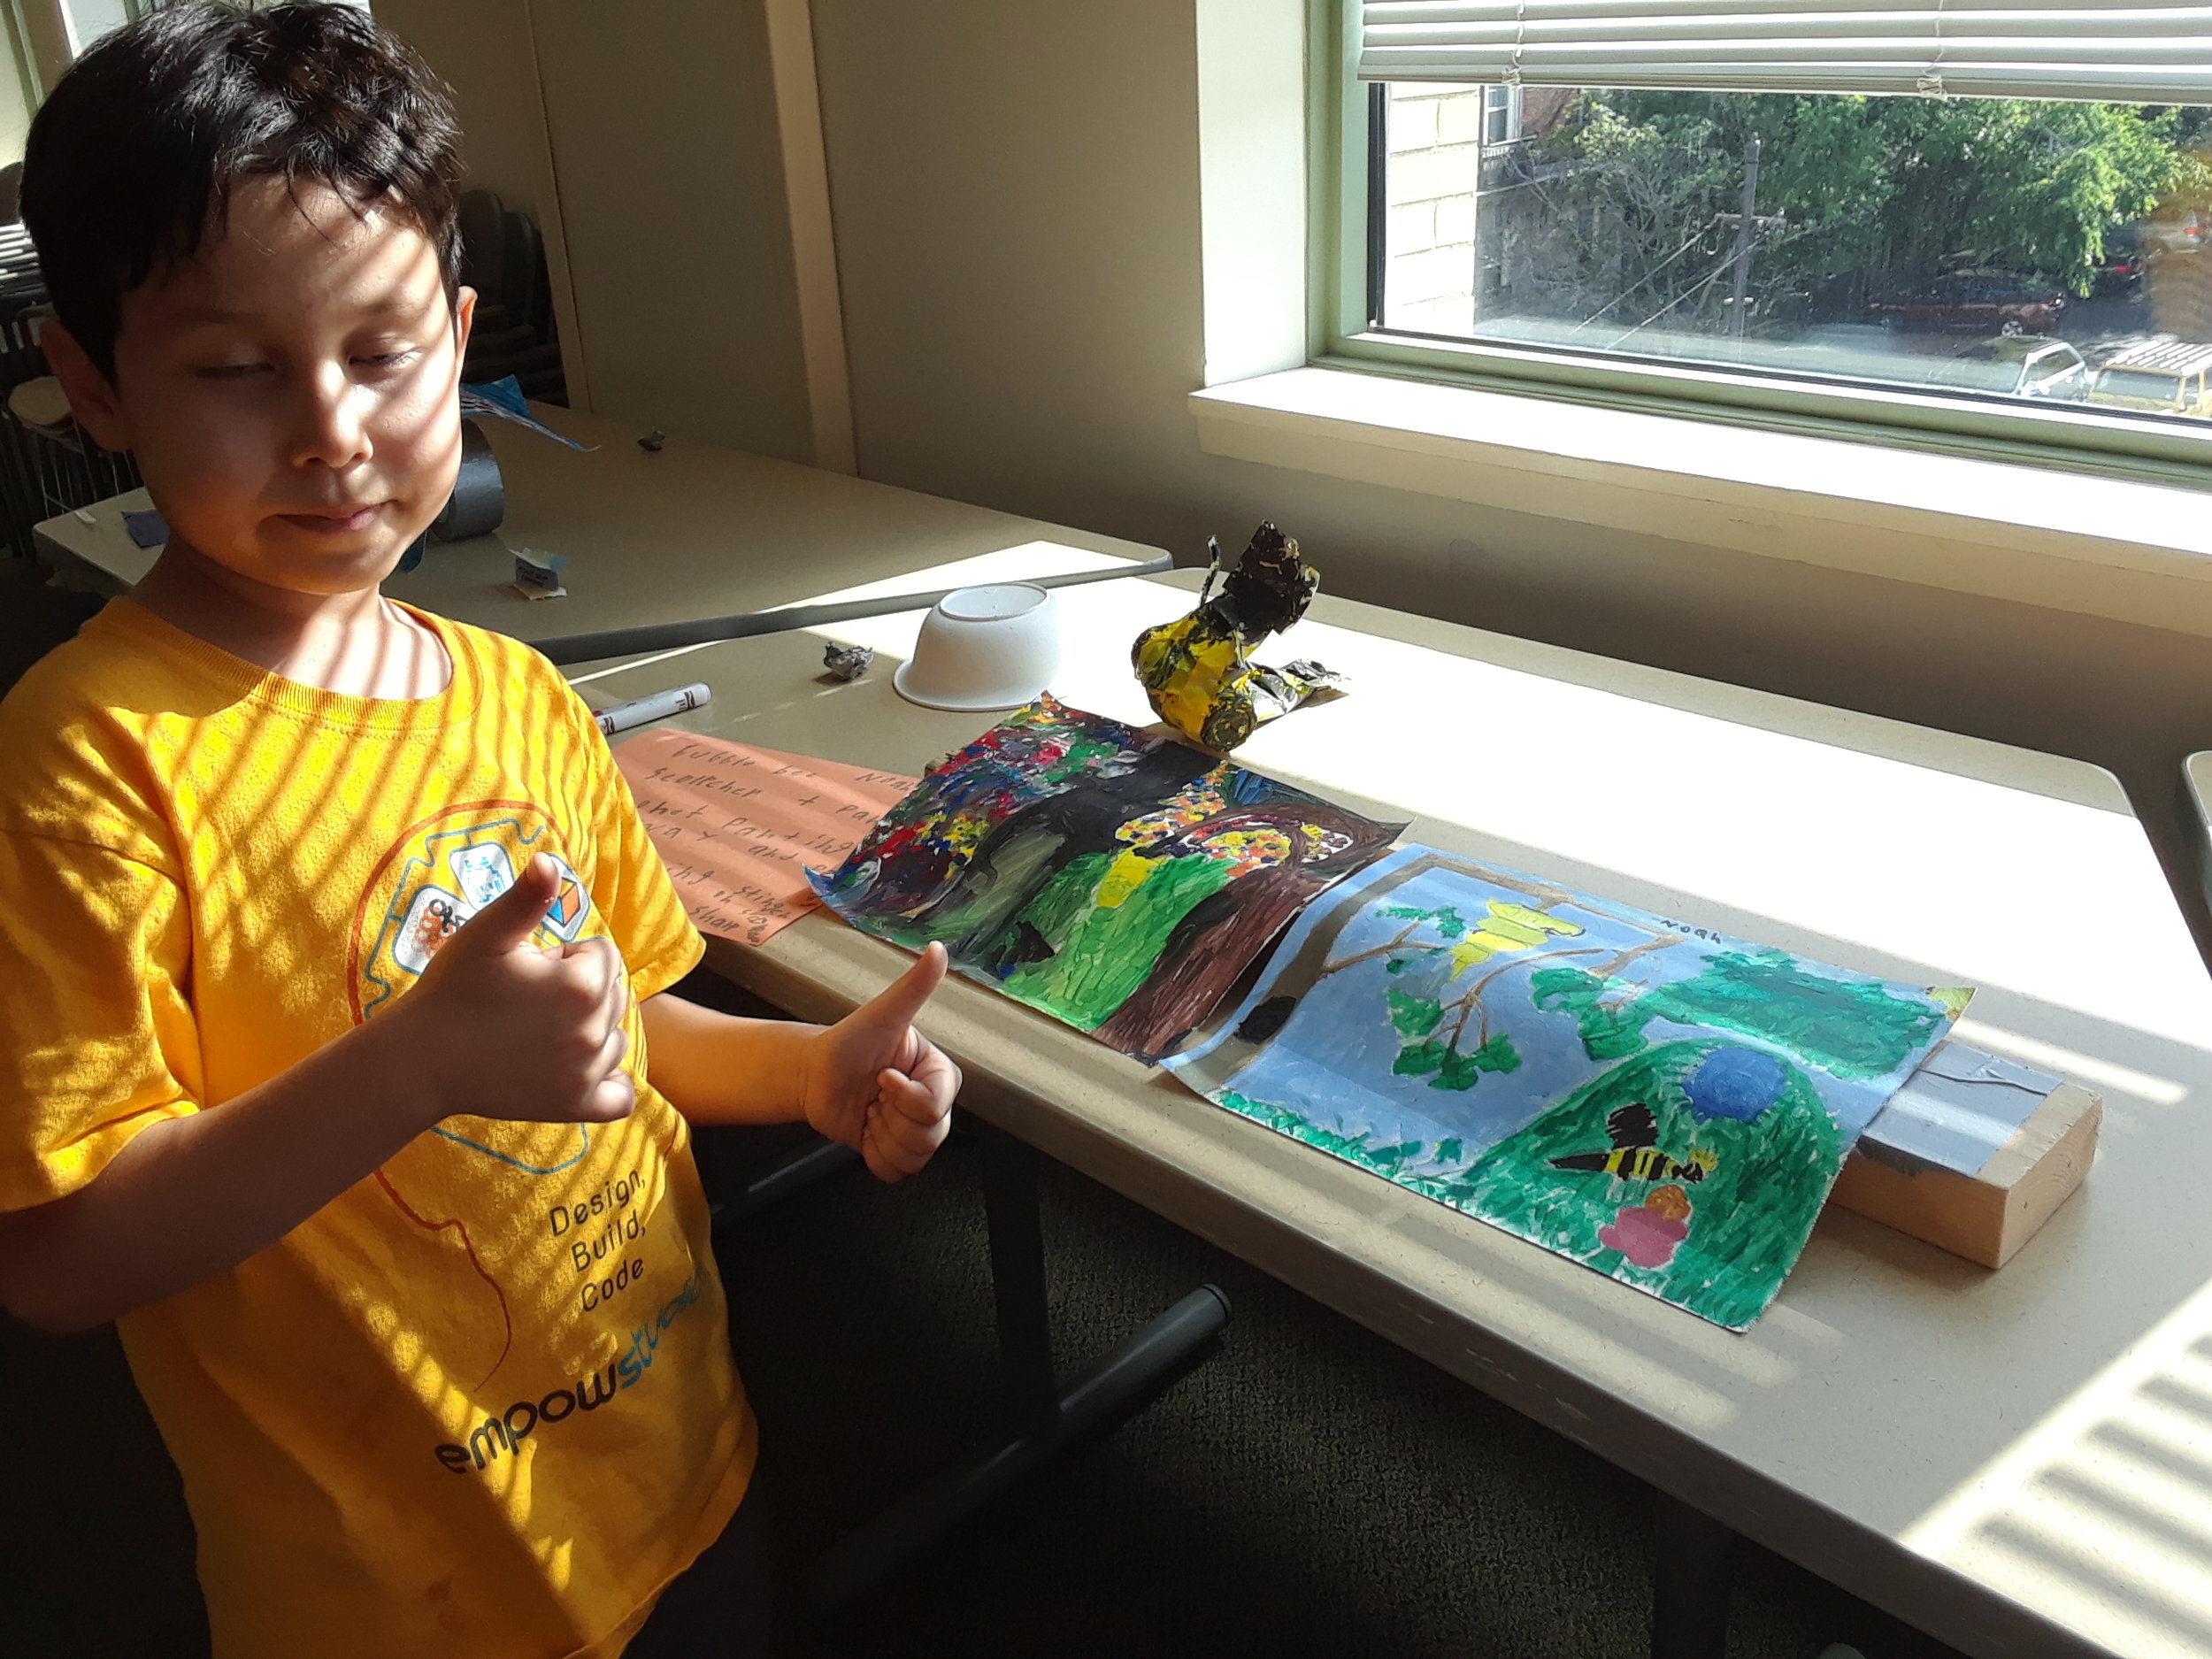 Student with his two paintings and sculpture inspired by bees.